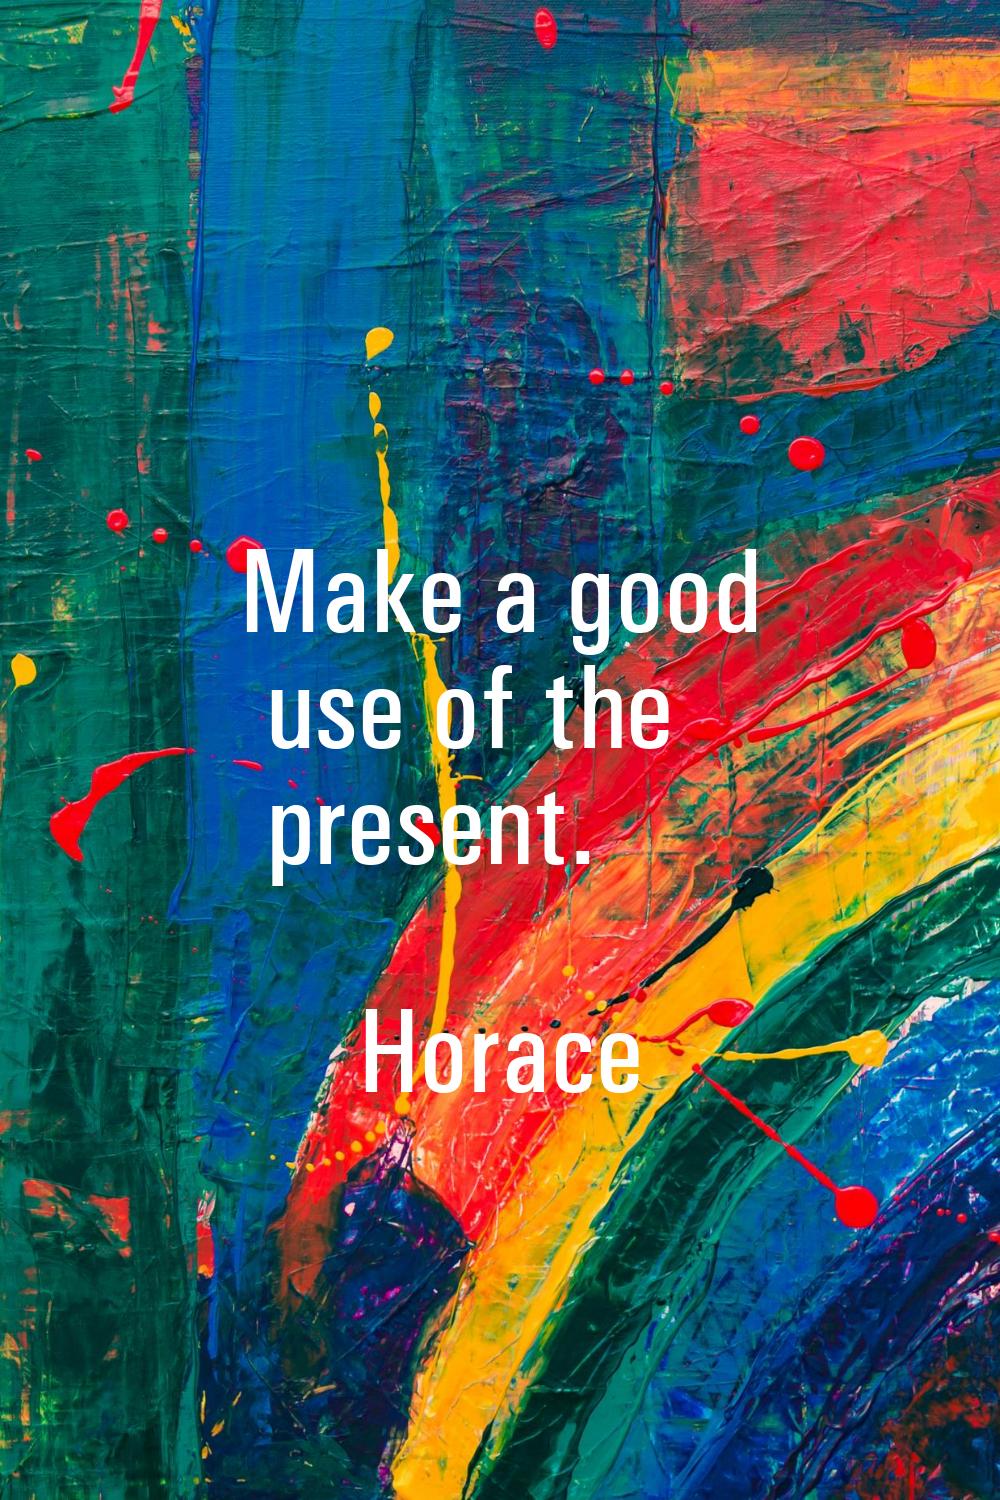 Make a good use of the present.